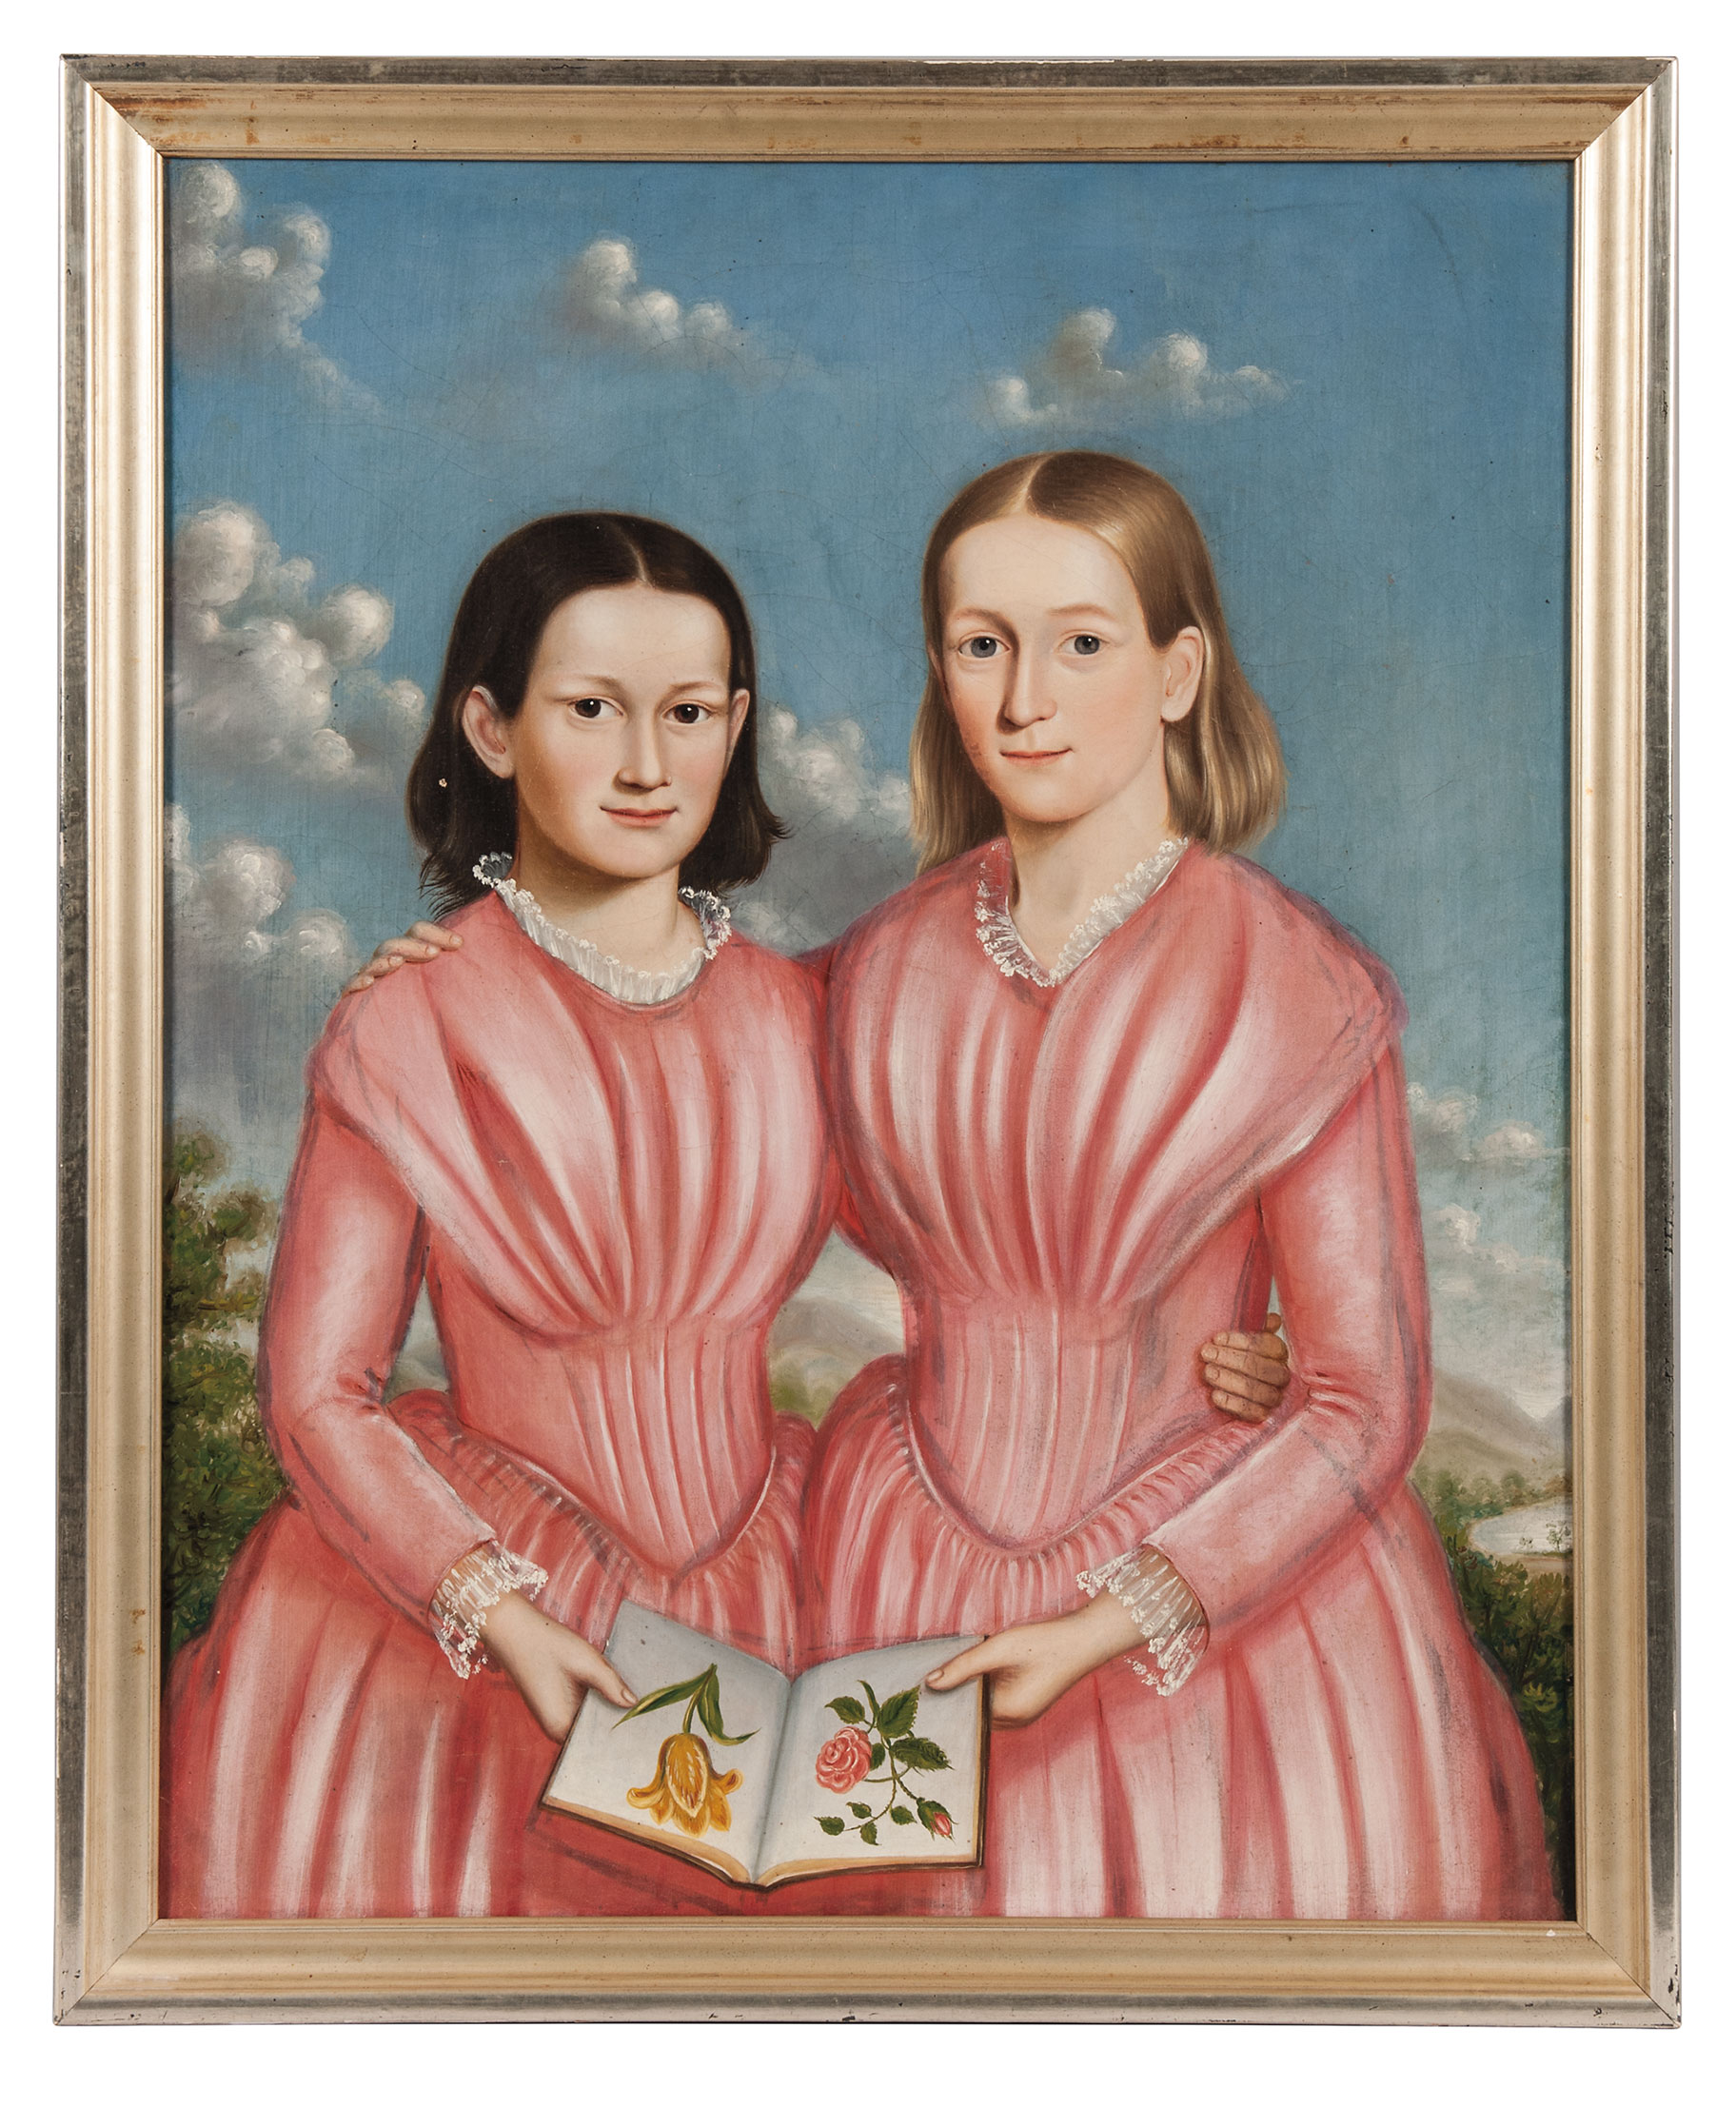 A winsome double folk portrait of sisters, painted by an unknown American artist.